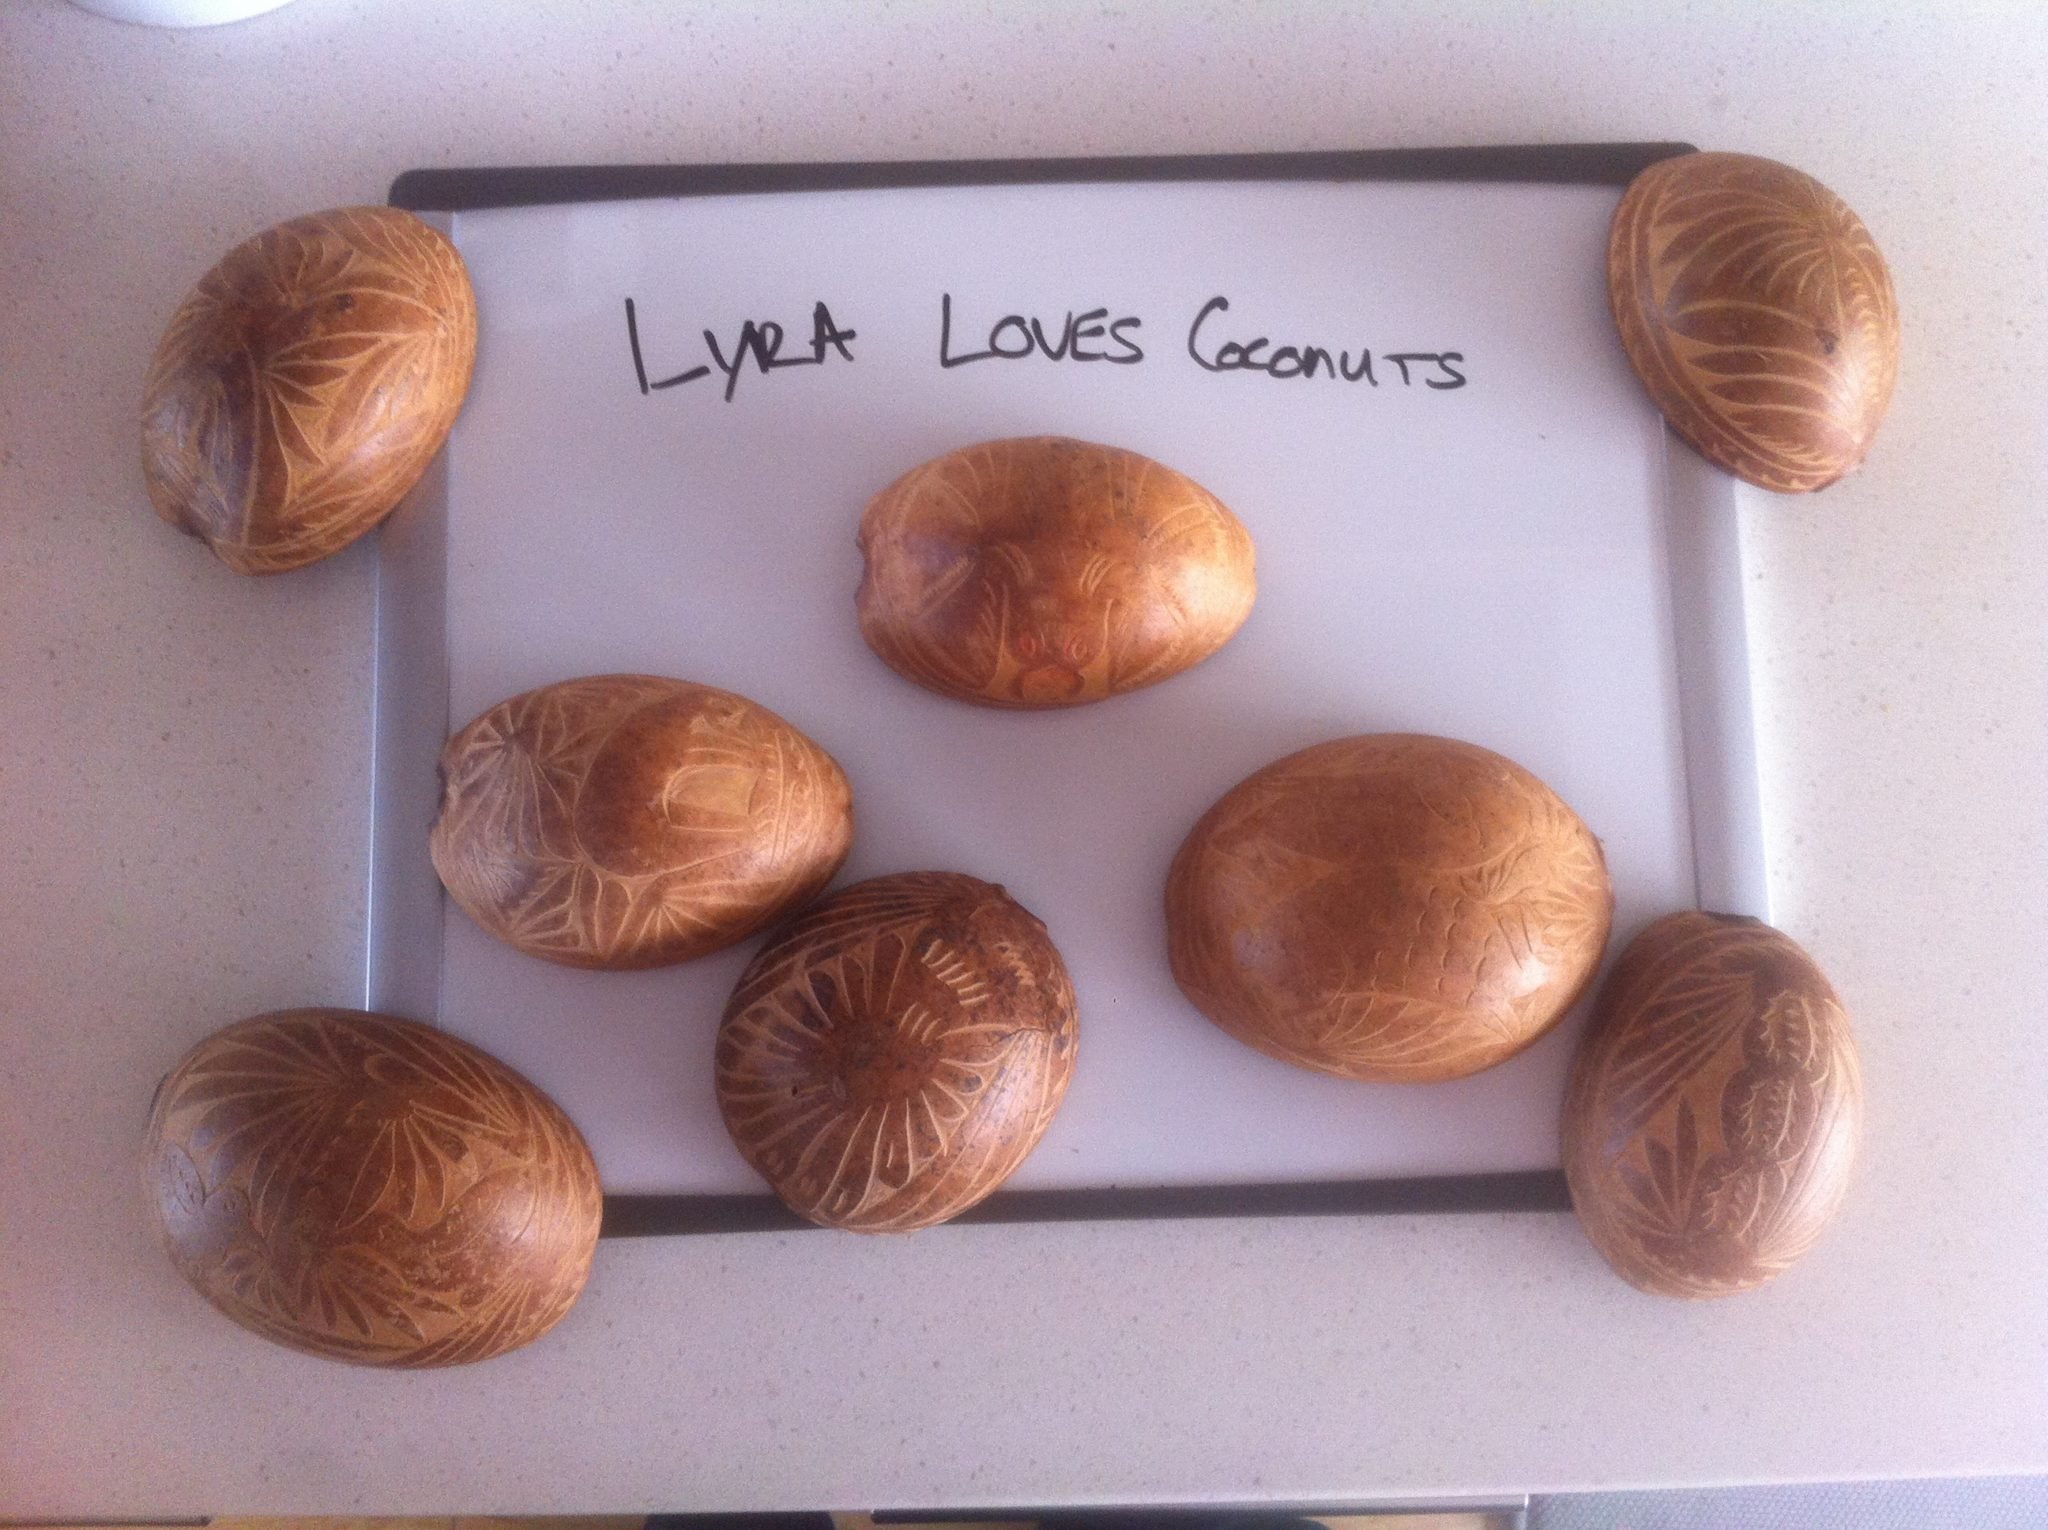 Lyra : Sold displays carved coconut shells in its office to 'keep the fun around.